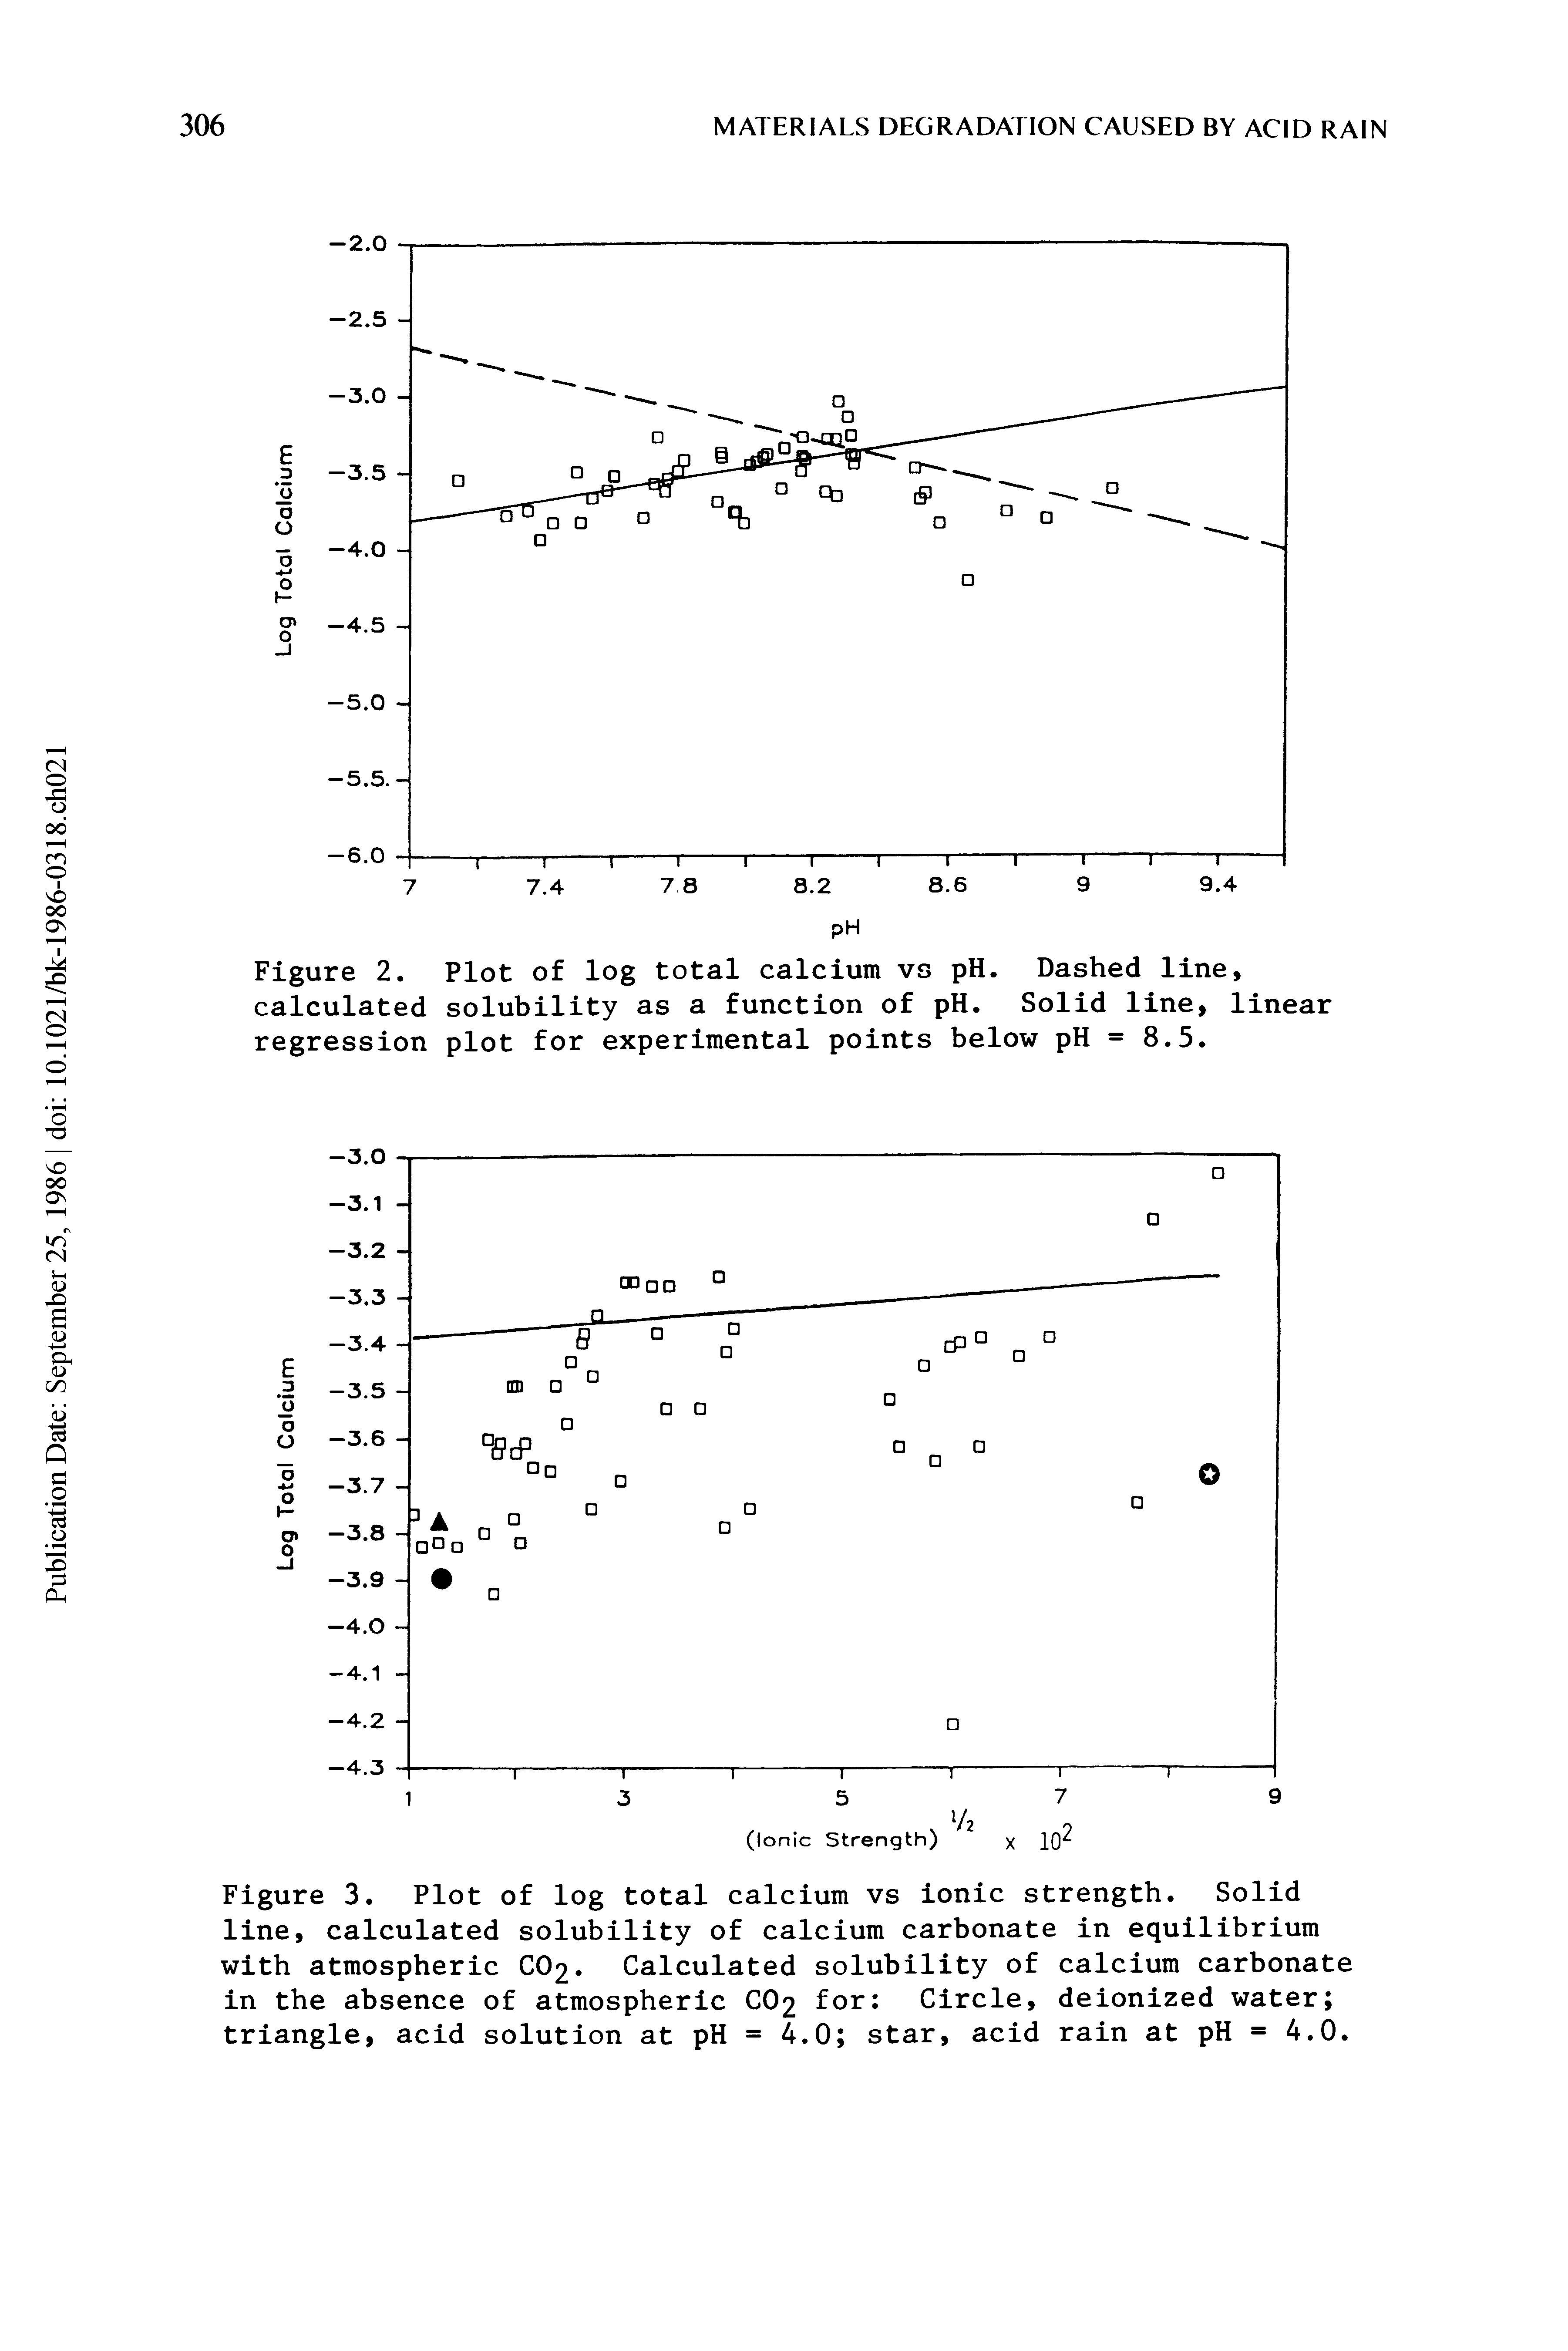 Figure 3. Plot of log total calcium vs ionic strength. Solid line, calculated solubility of calcium carbonate in equilibrium with atmospheric CO2. Calculated solubility of calcium carbonate in the absence of atmospheric CO2 for Circle, deionized water triangle, acid solution at pH = 4.0 star, acid rain at pH = 4.0.